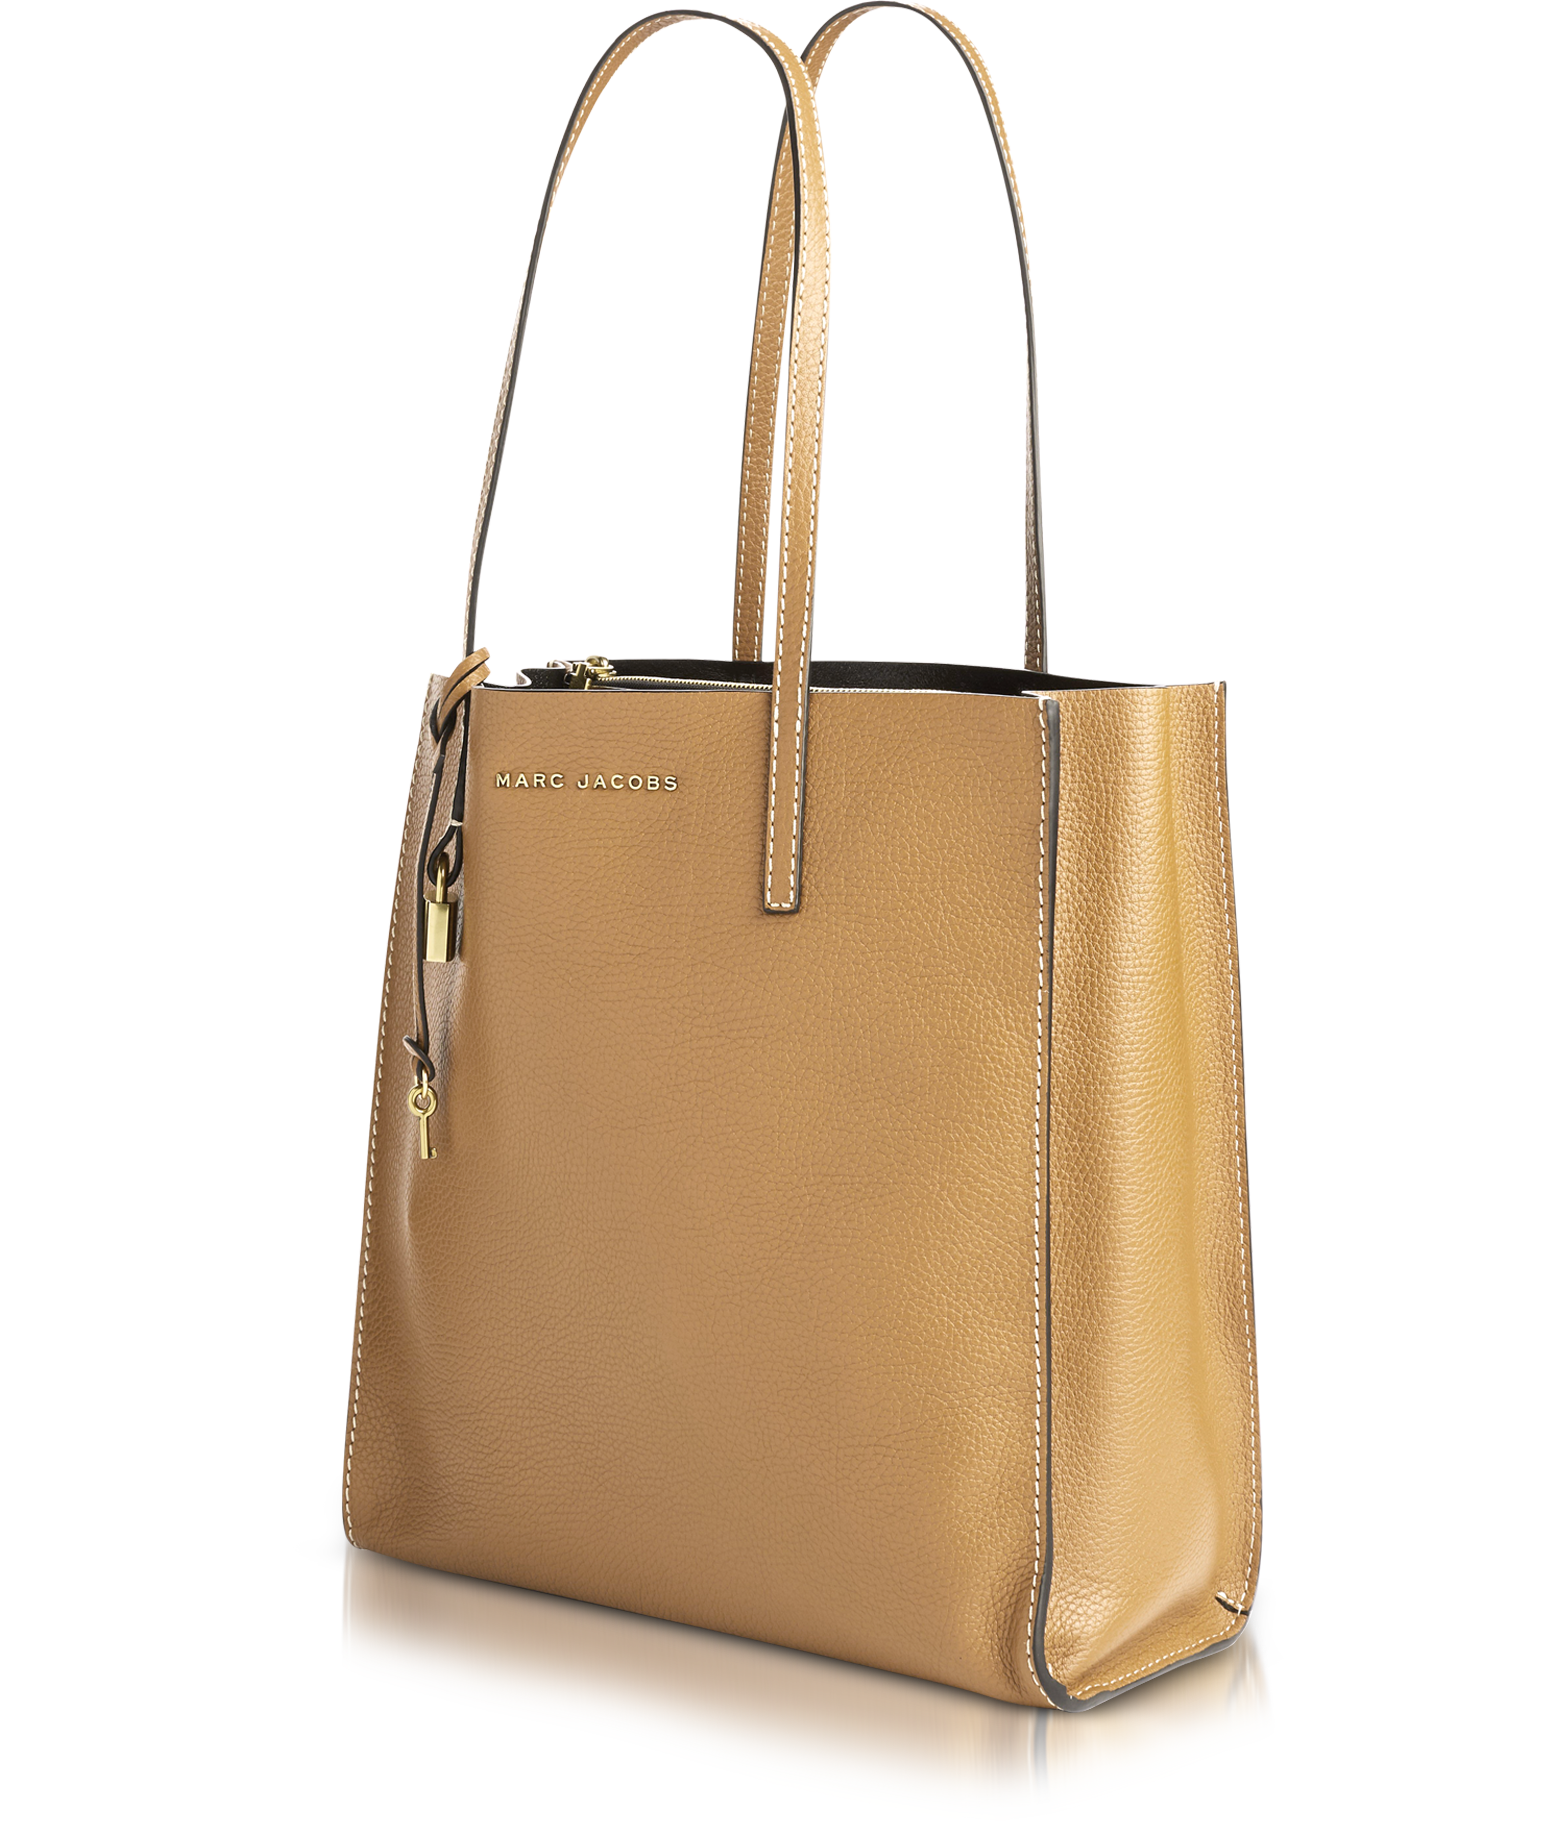 Marc Jacobs Golden Beige Leather The Grind Shopper Tote Bag at FORZIERI